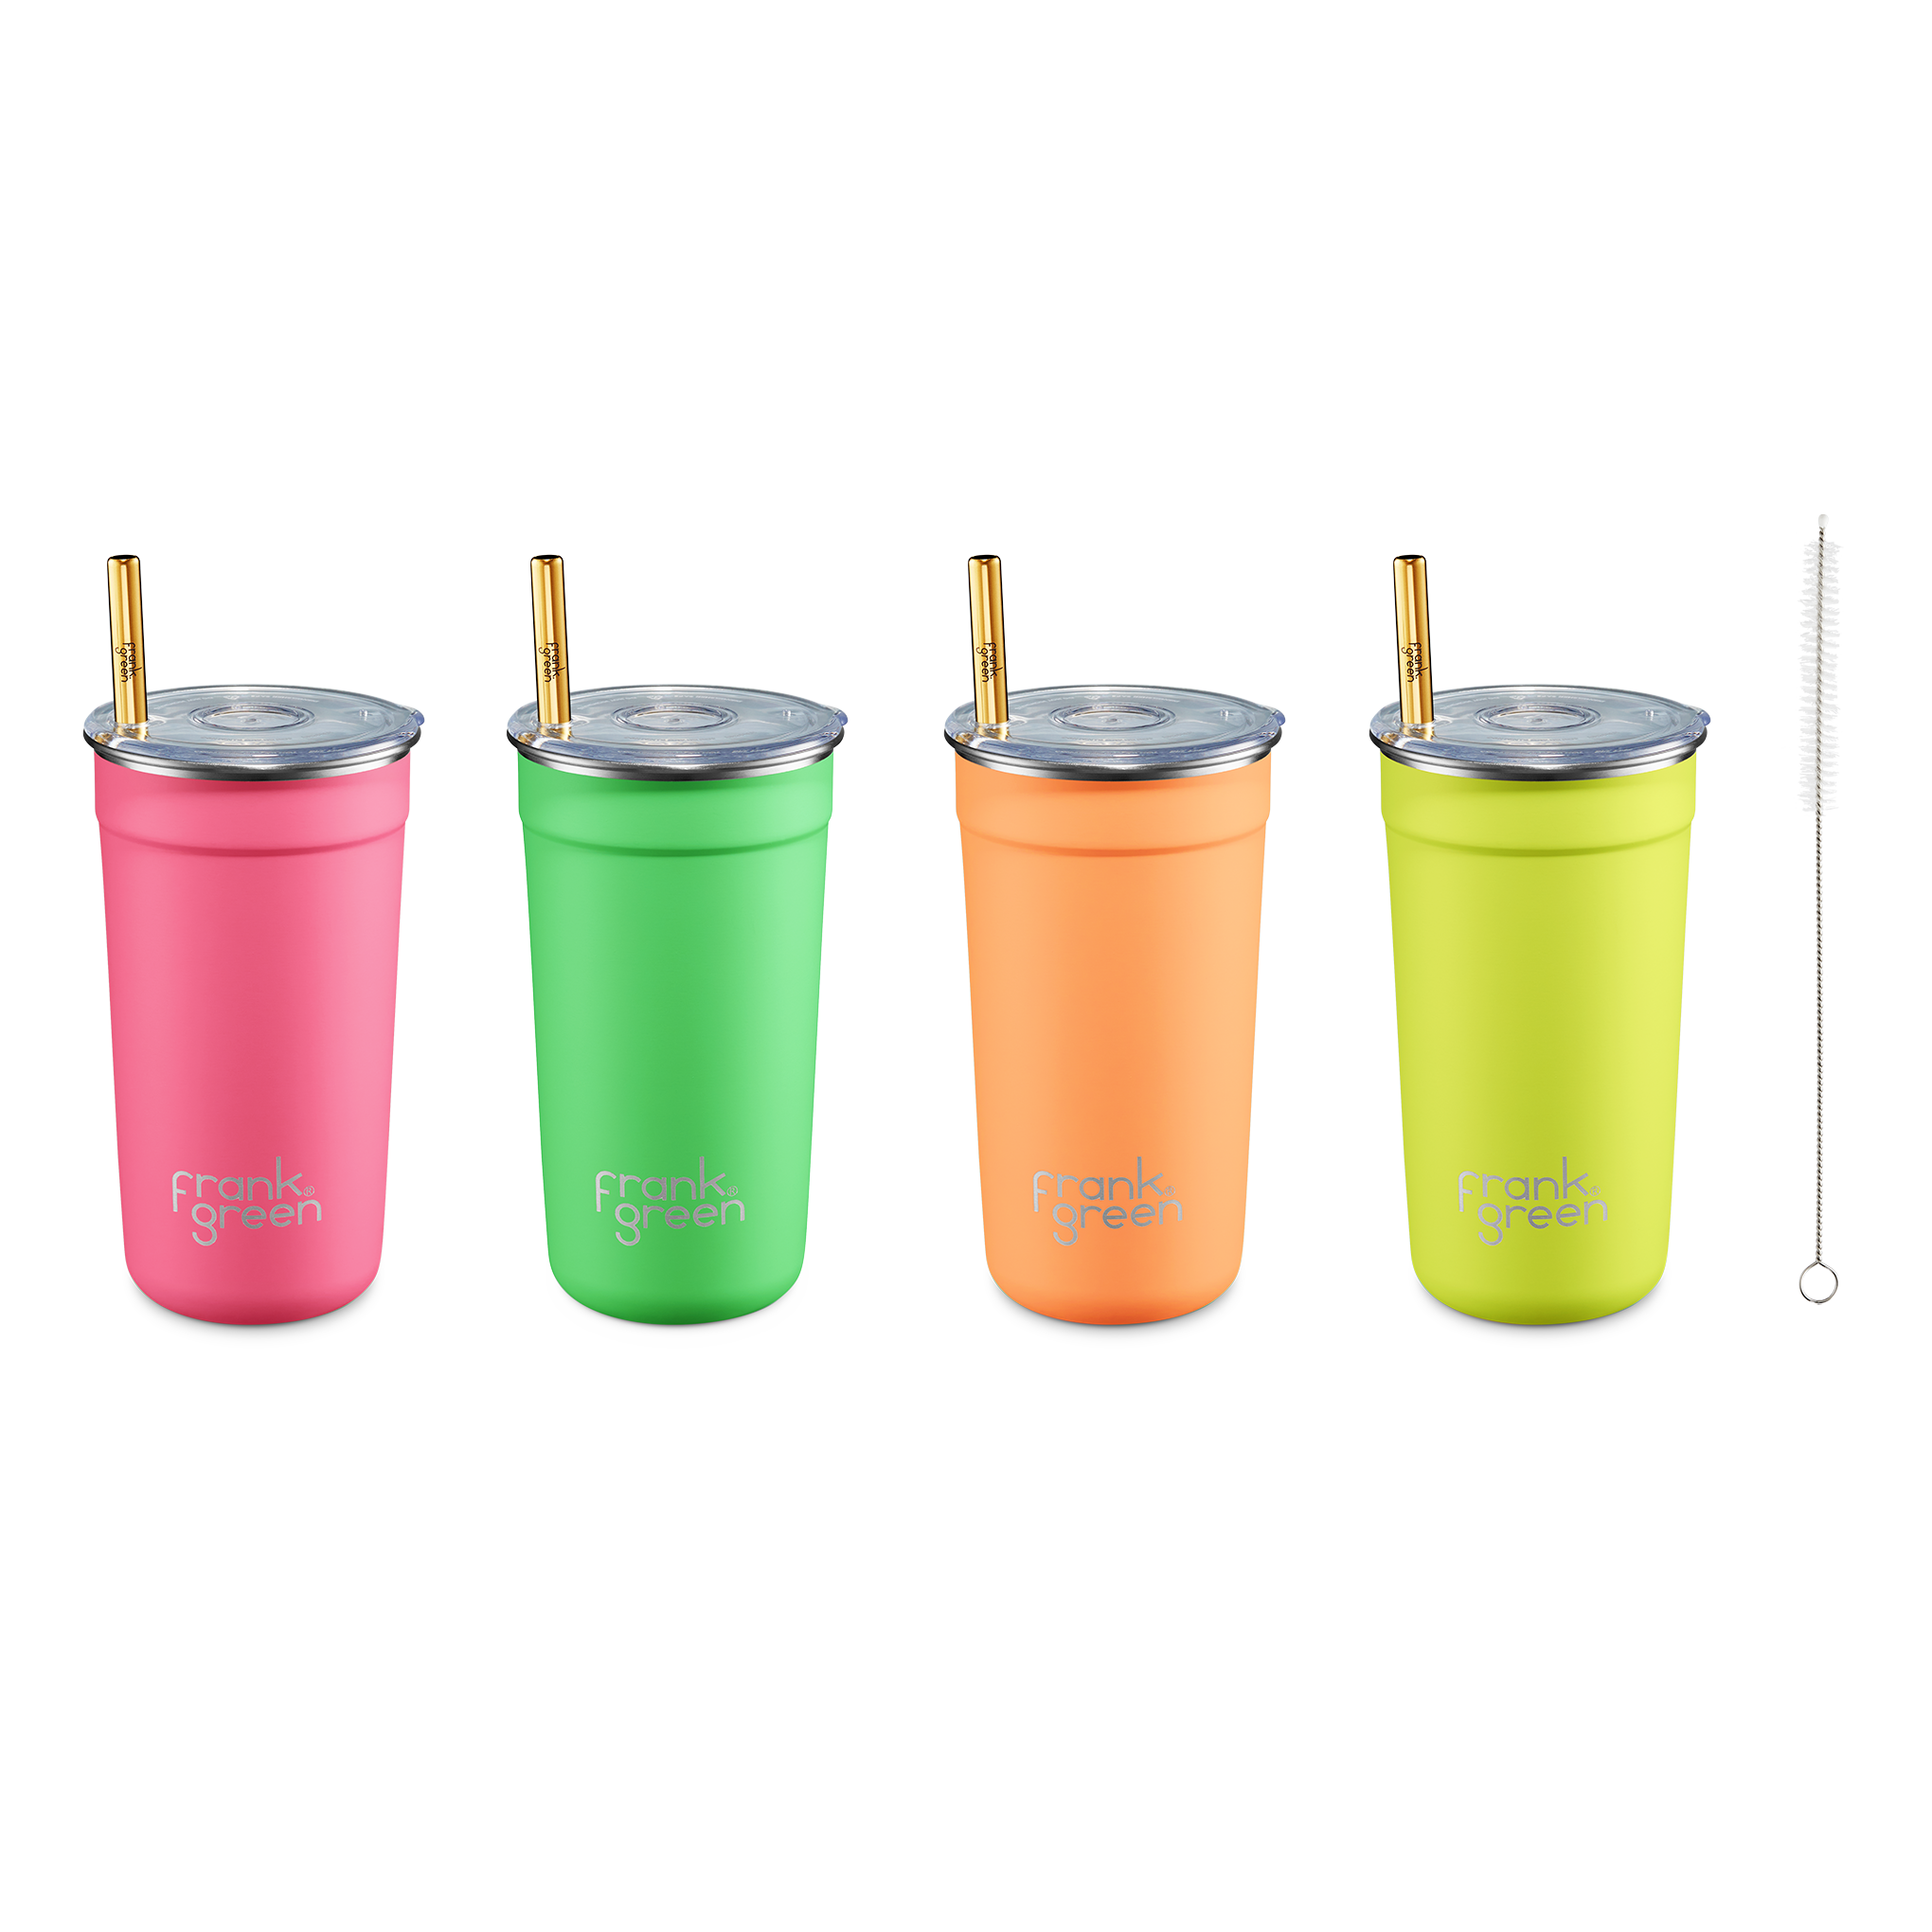 NEON Frank Green Re-usable Party Cups 16oz / 475ml - 4 pack